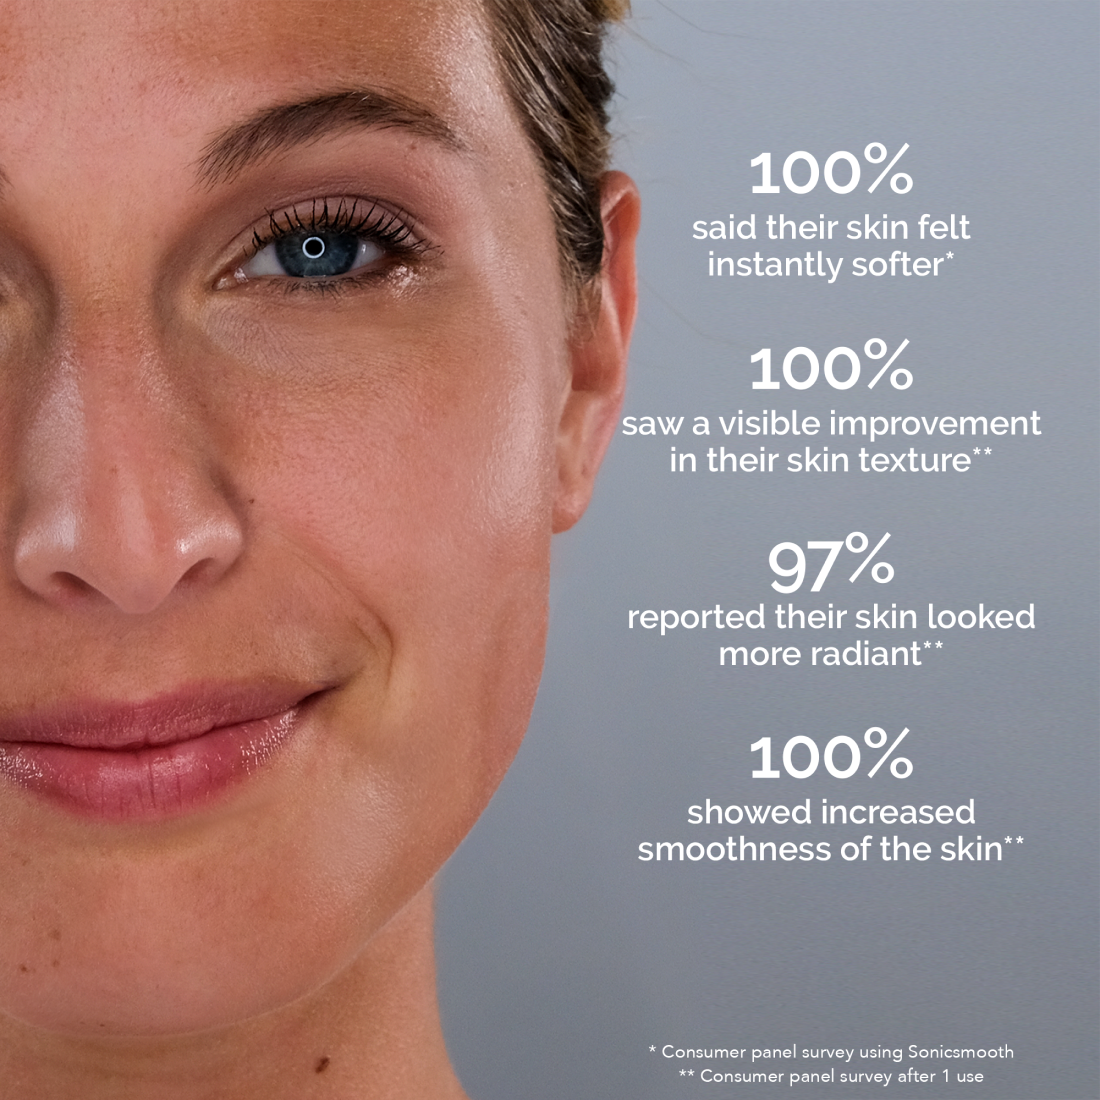 A close-up of a woman's face showcasing her radiant complexion after using the Michael Todd Beauty 2-Piece Best Sellers Kit.